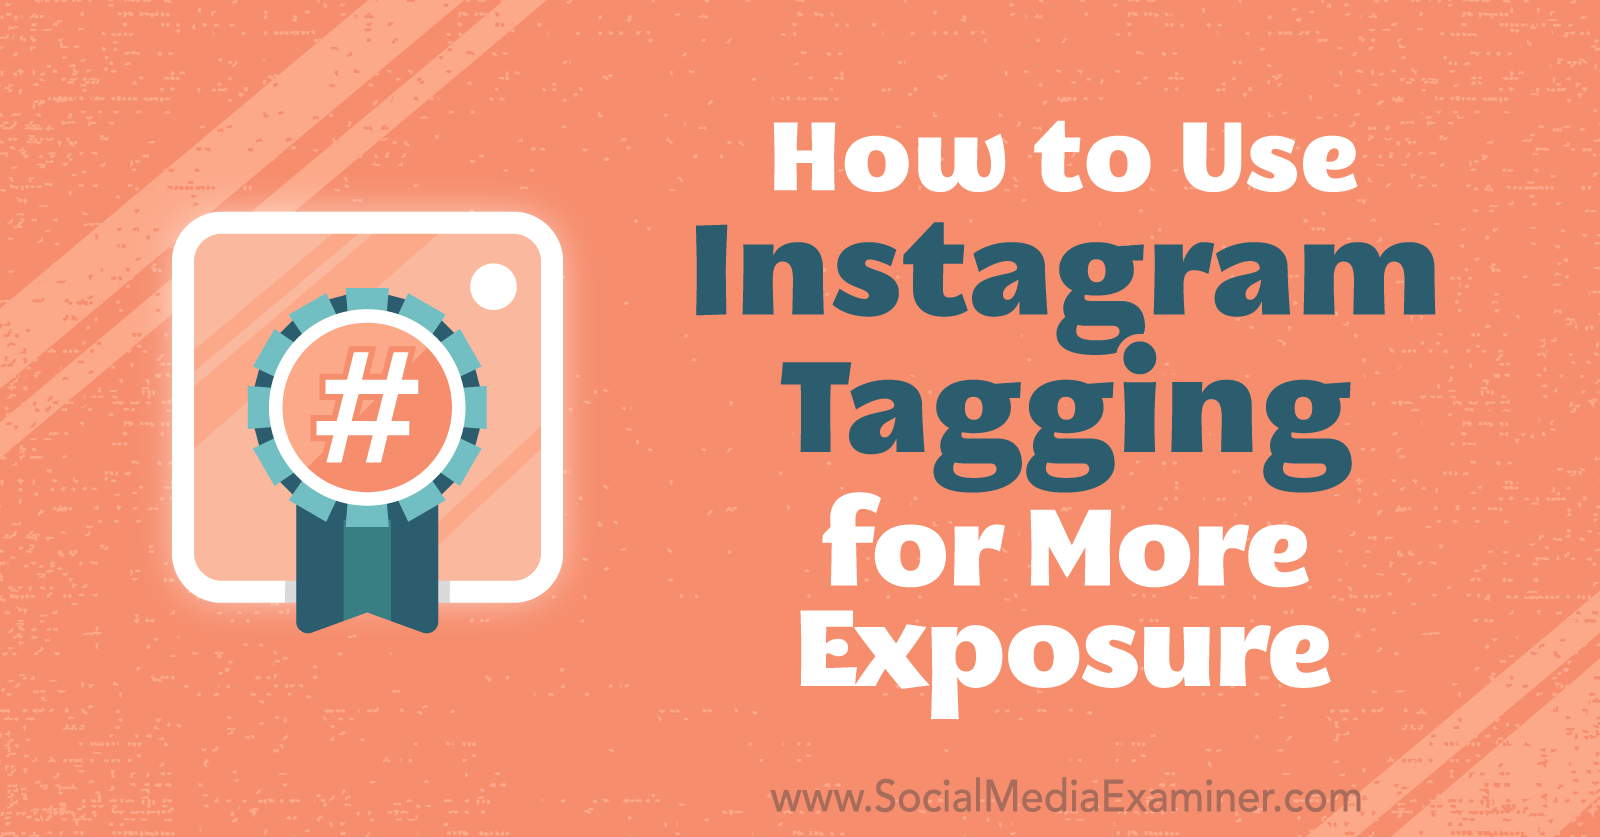 How to Use Instagram Tagging for More Exposure by Jenn Herman on Social Media Examiner.